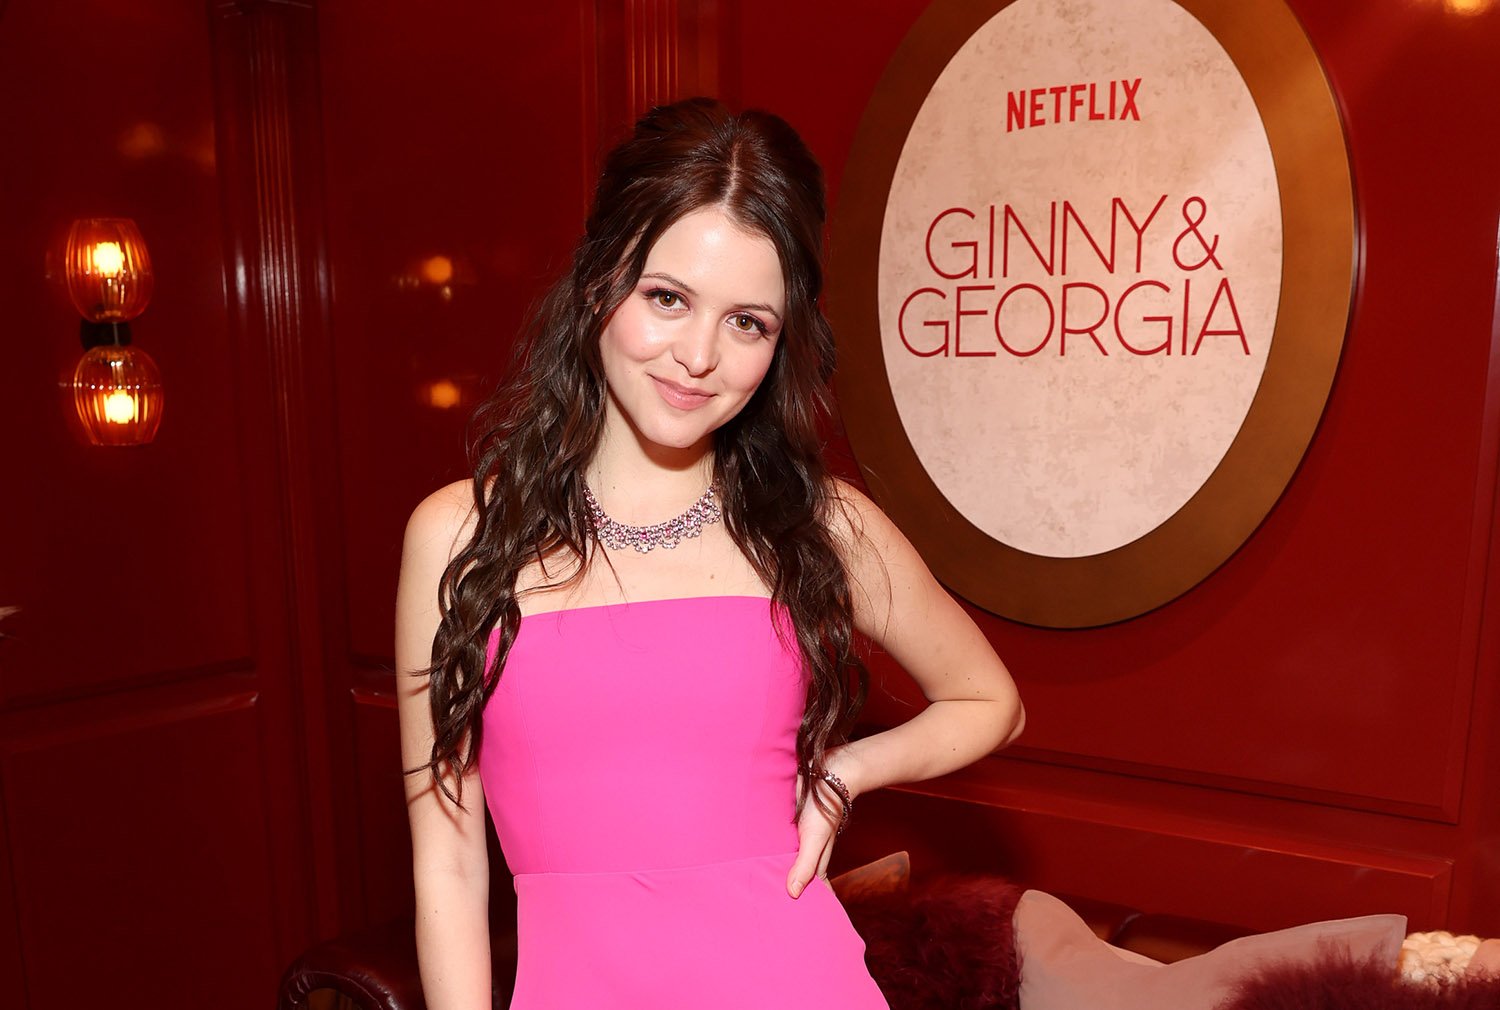 Ginny & Georgia star Sara Waisglass poses in a pink dress at a dinner to celebrate season 2